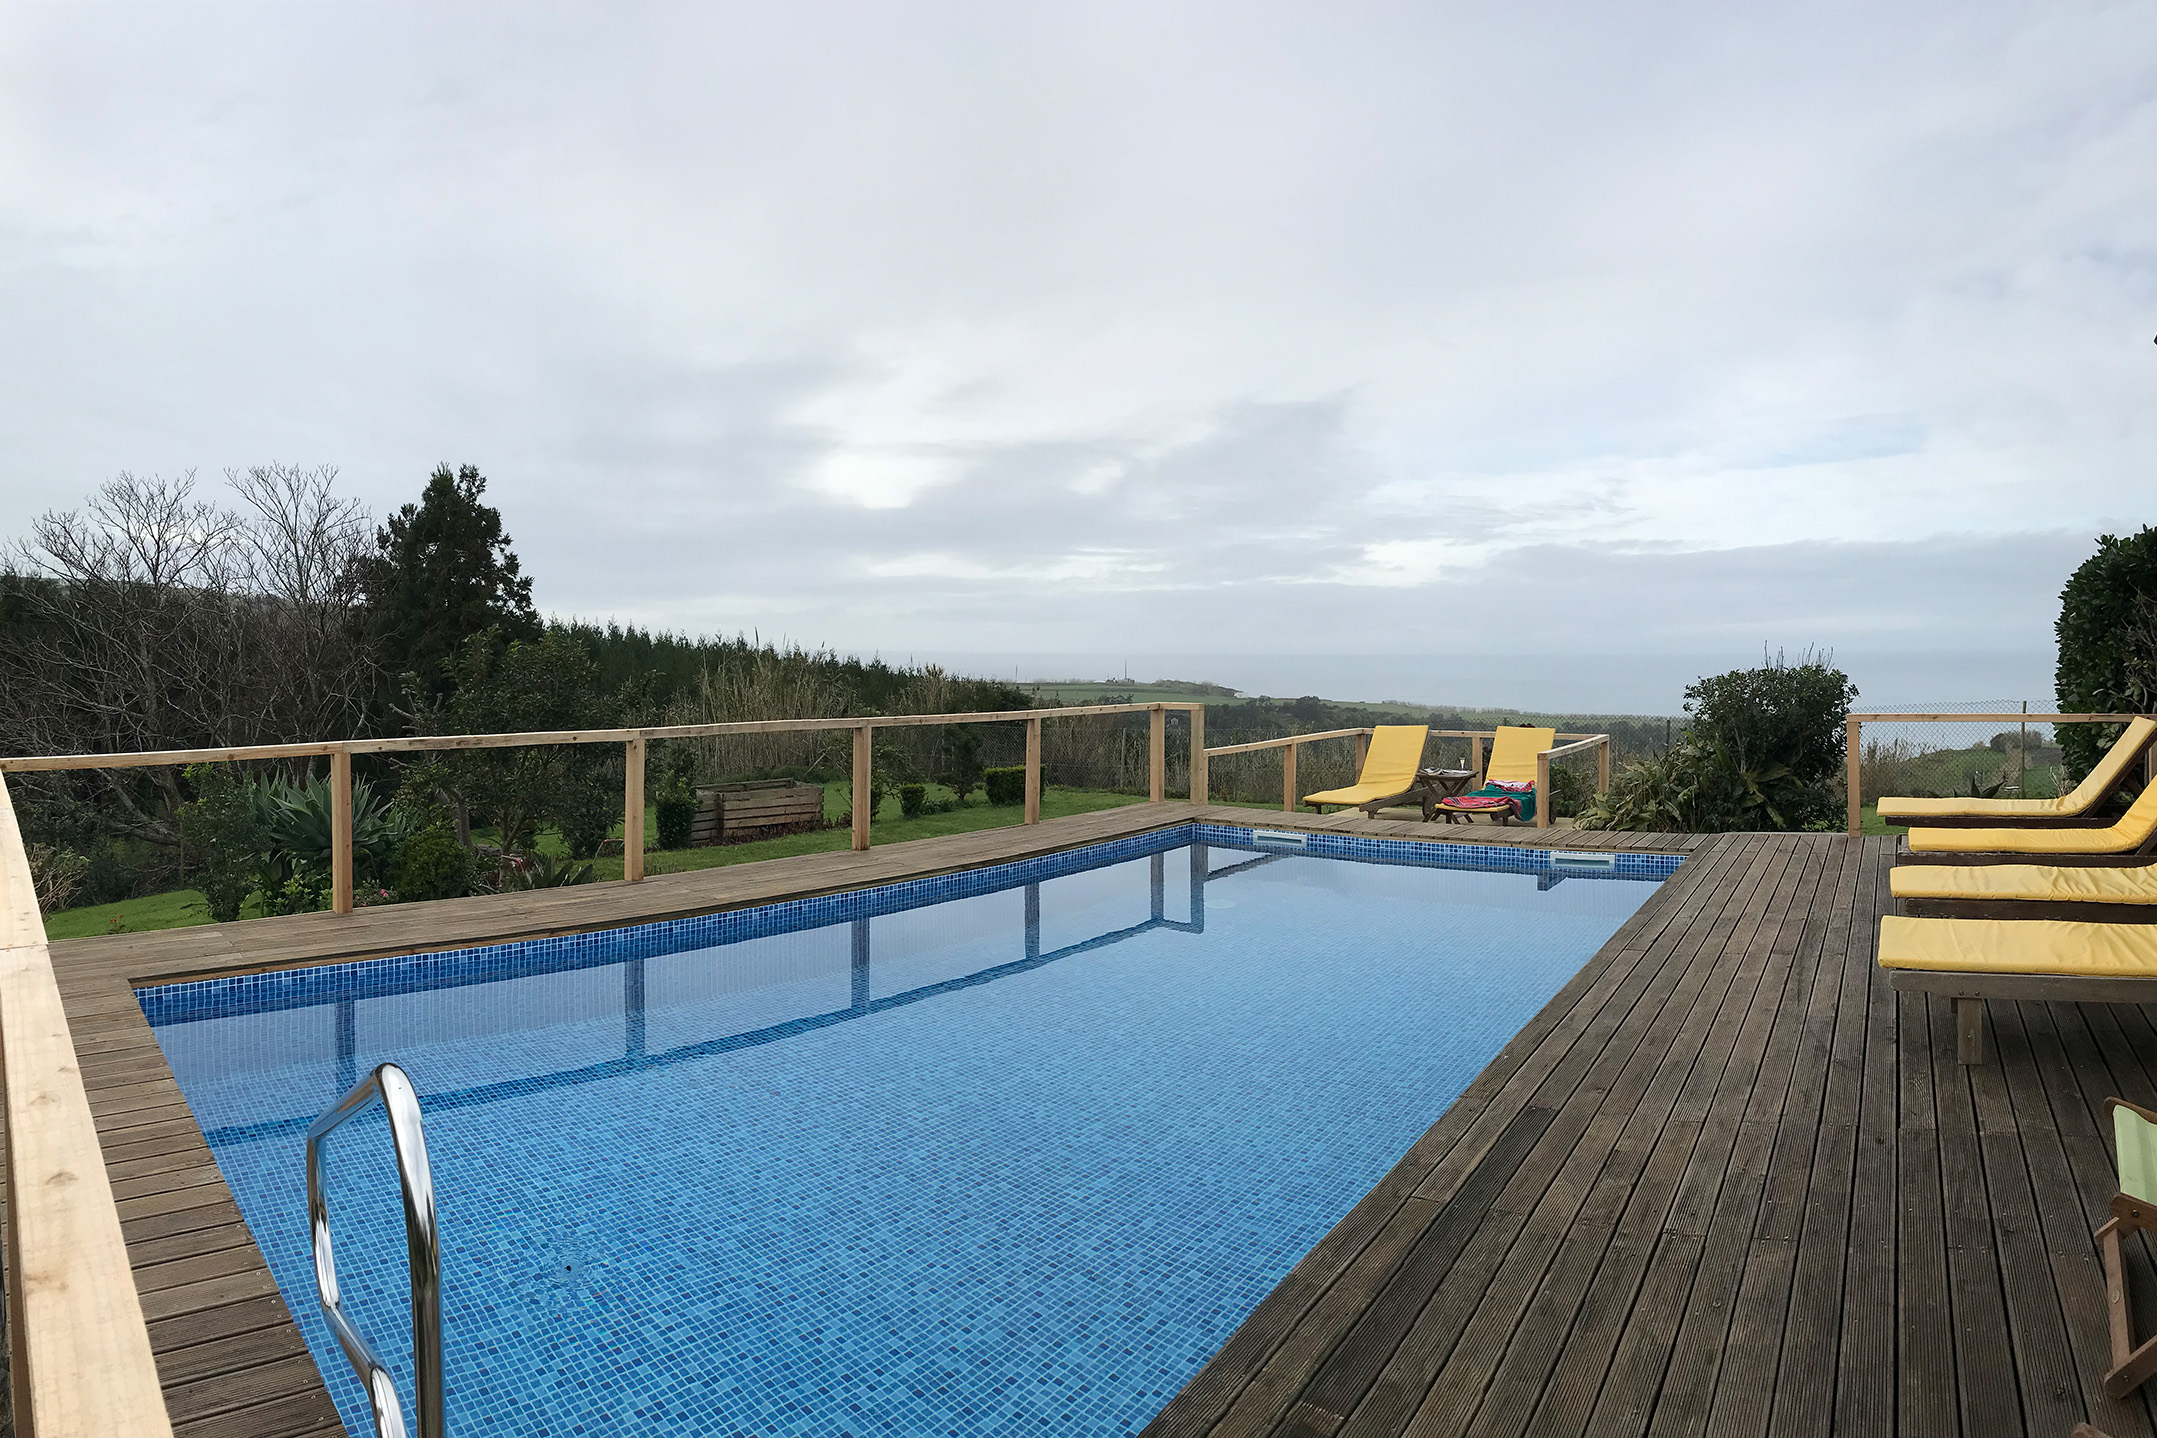 Outdoor pool and view from the Tradicampo Eco Country House in Nordeste, Portugal